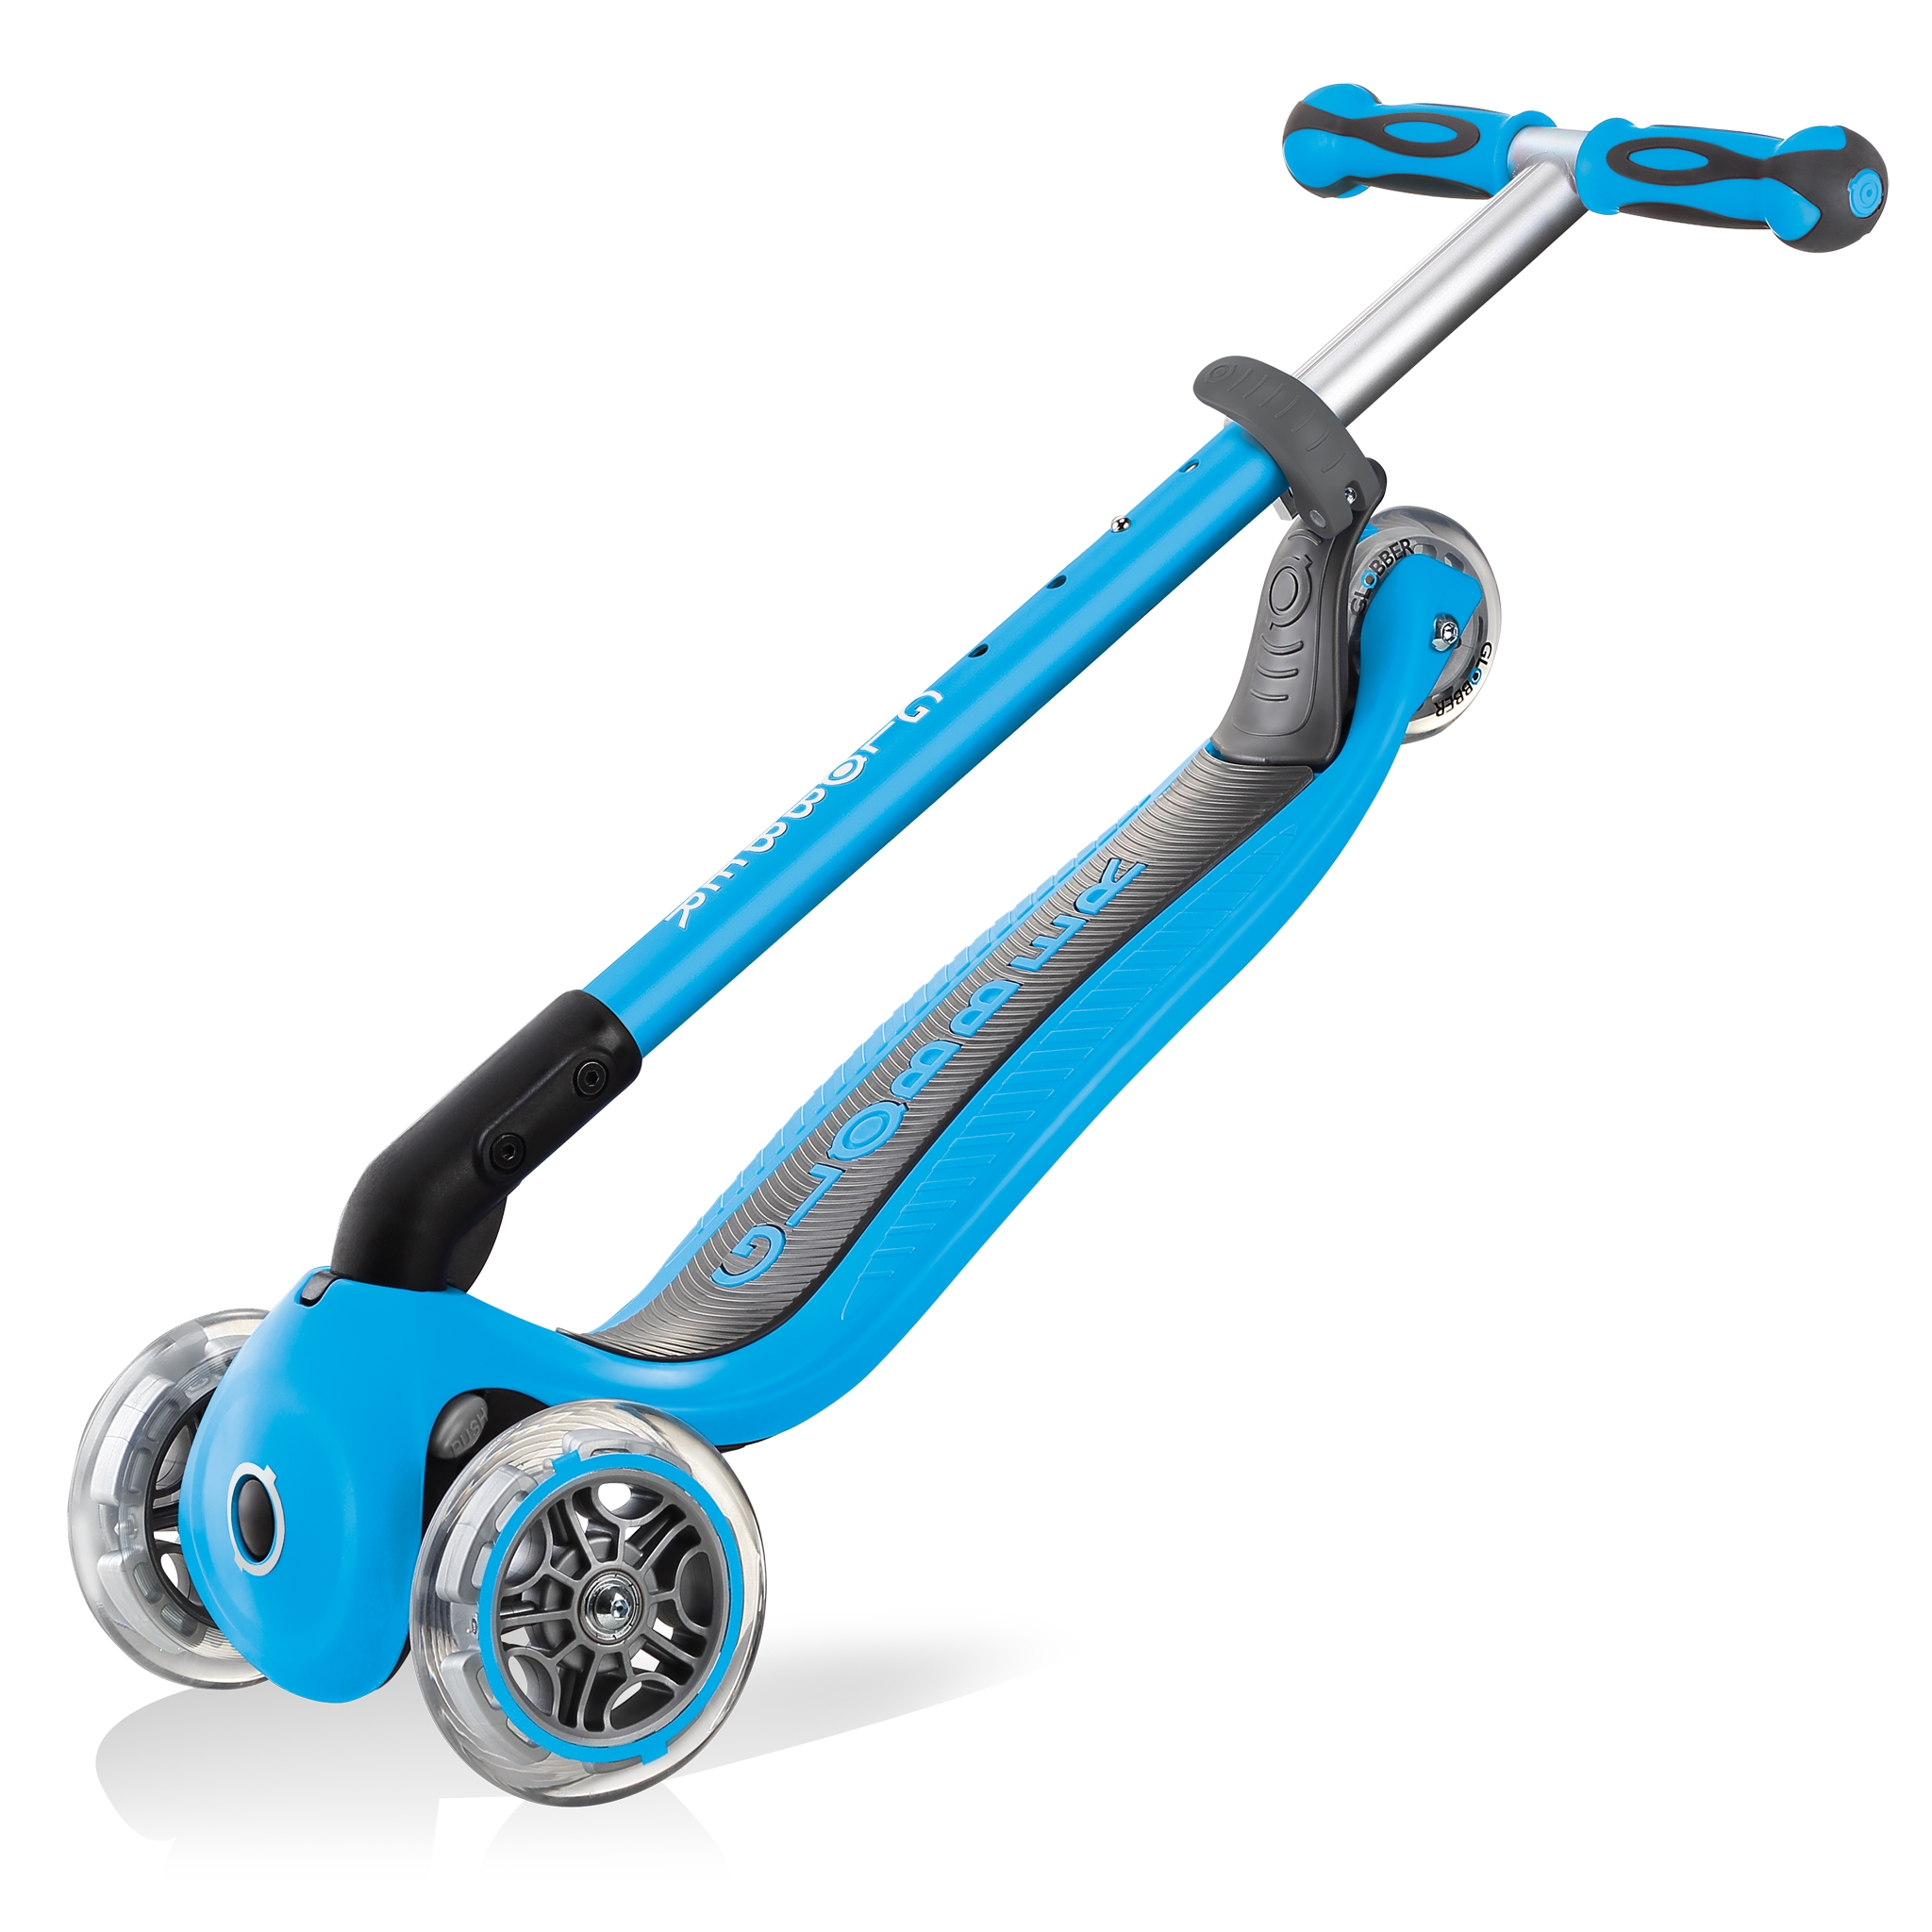 GO-UP-DELUXE-PLAY-ride-on-walking-bike-scooter-with-light-and-sound-module-trolley-mode-compatible-sky-blue 5